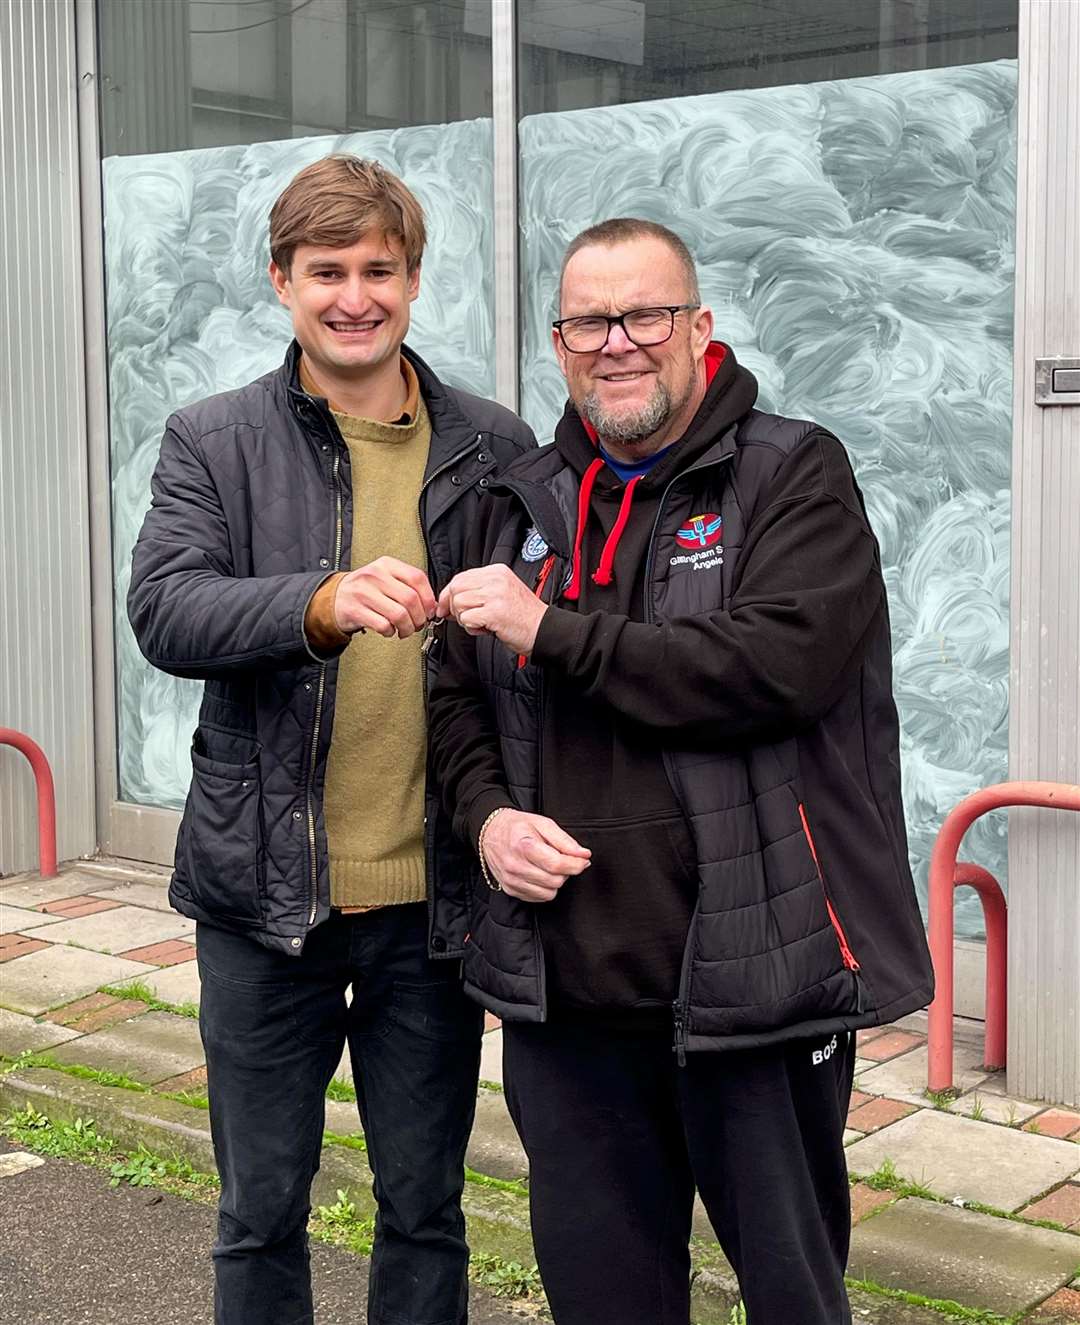 Neil Charlick, chief executive of Gillingham Street Angels(righ) receives keys from Peter Gray, director of Grays of Chatham Used Car Centre